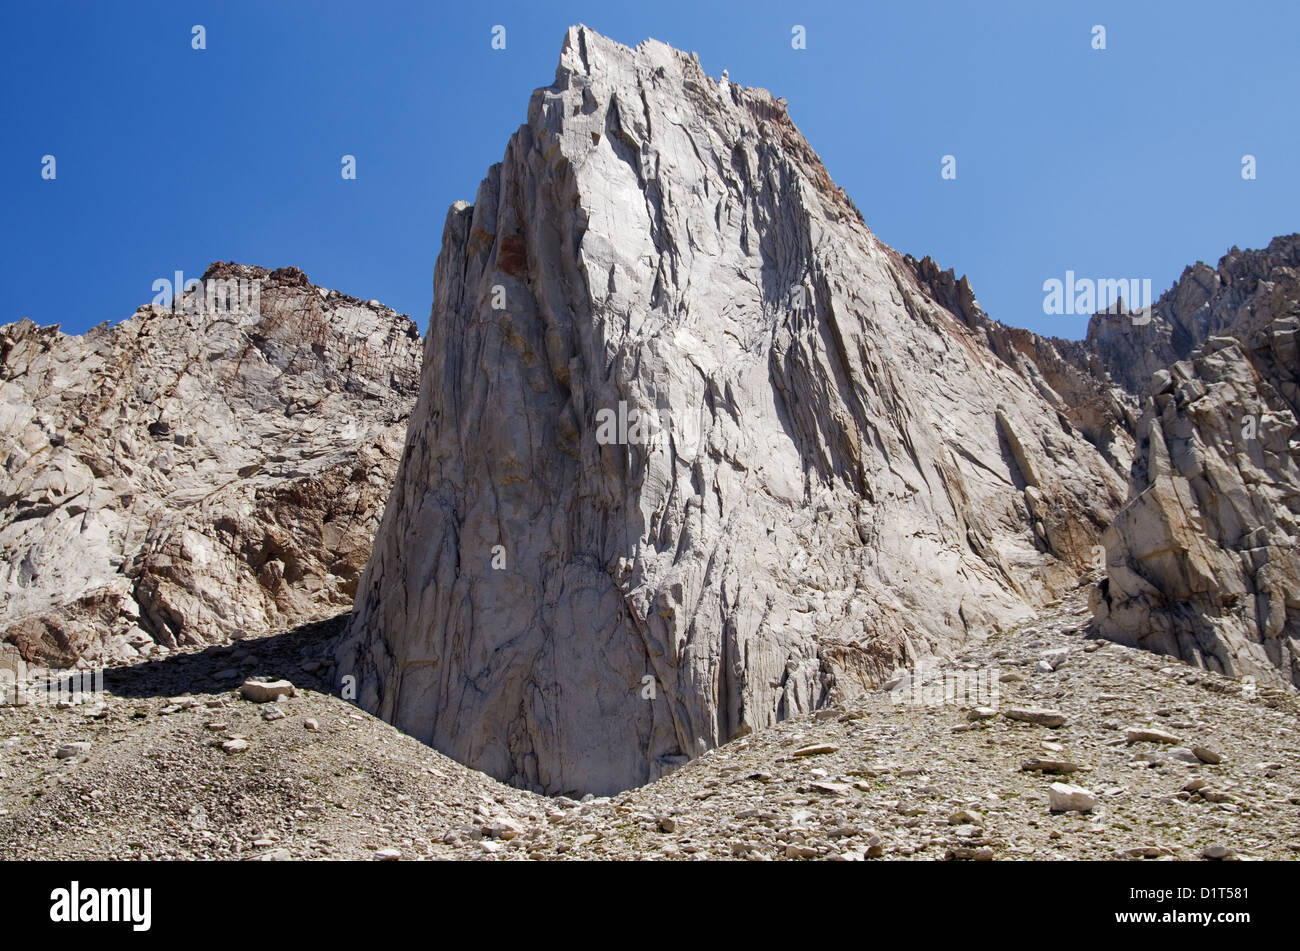 The Incredible Hulk rock formation in the Sierra Nevada Mountains Stock Photo